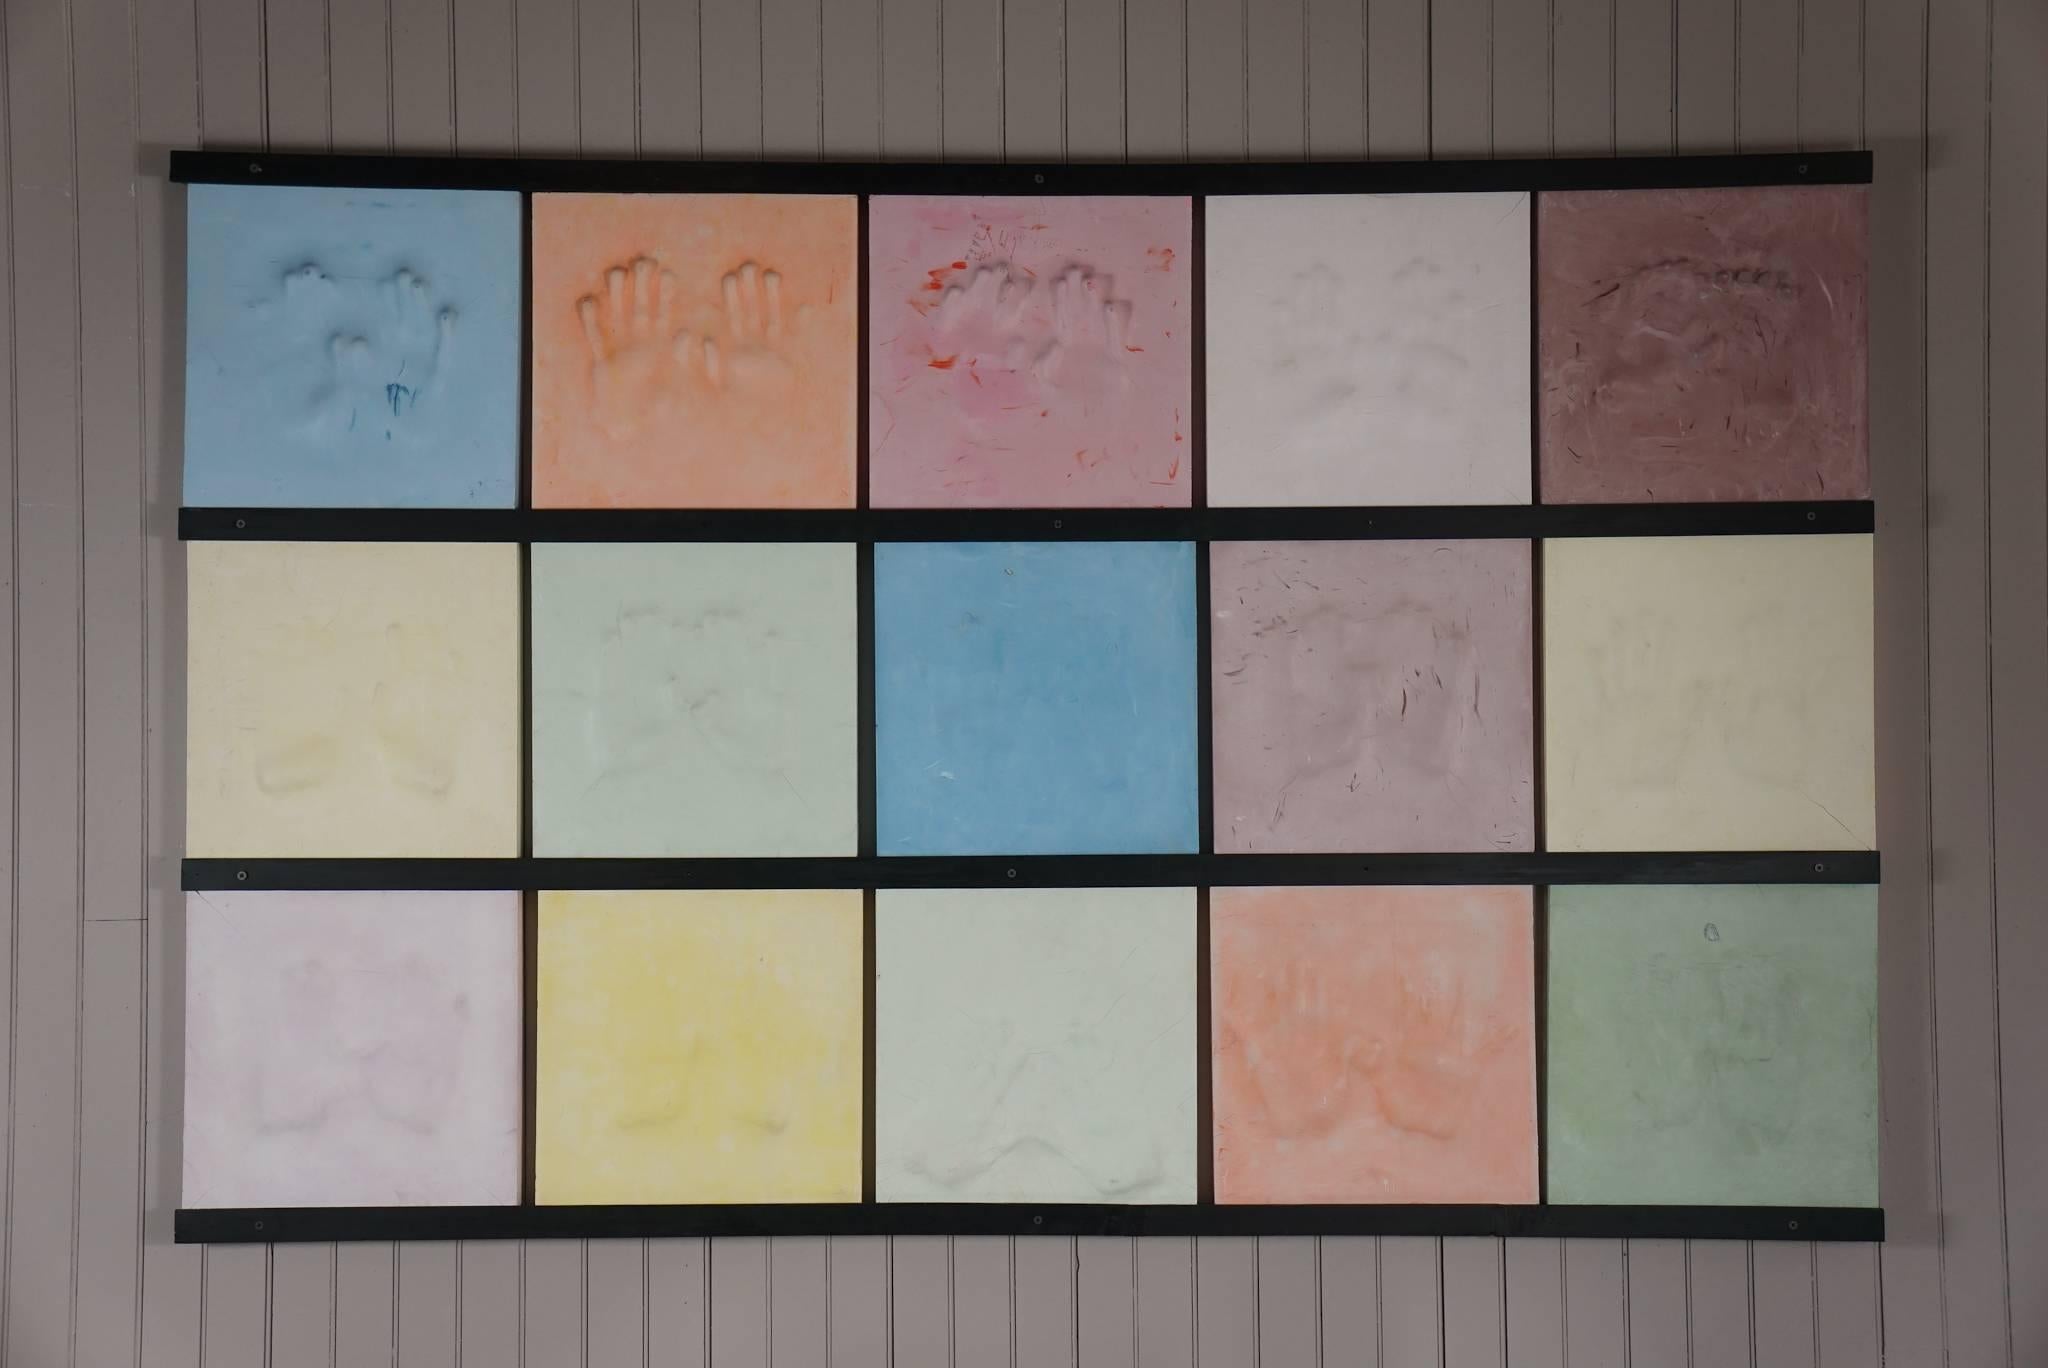 15 hollow plaster blocks of hands, in various pastel colors. Set on wooden strips attached to the wall.